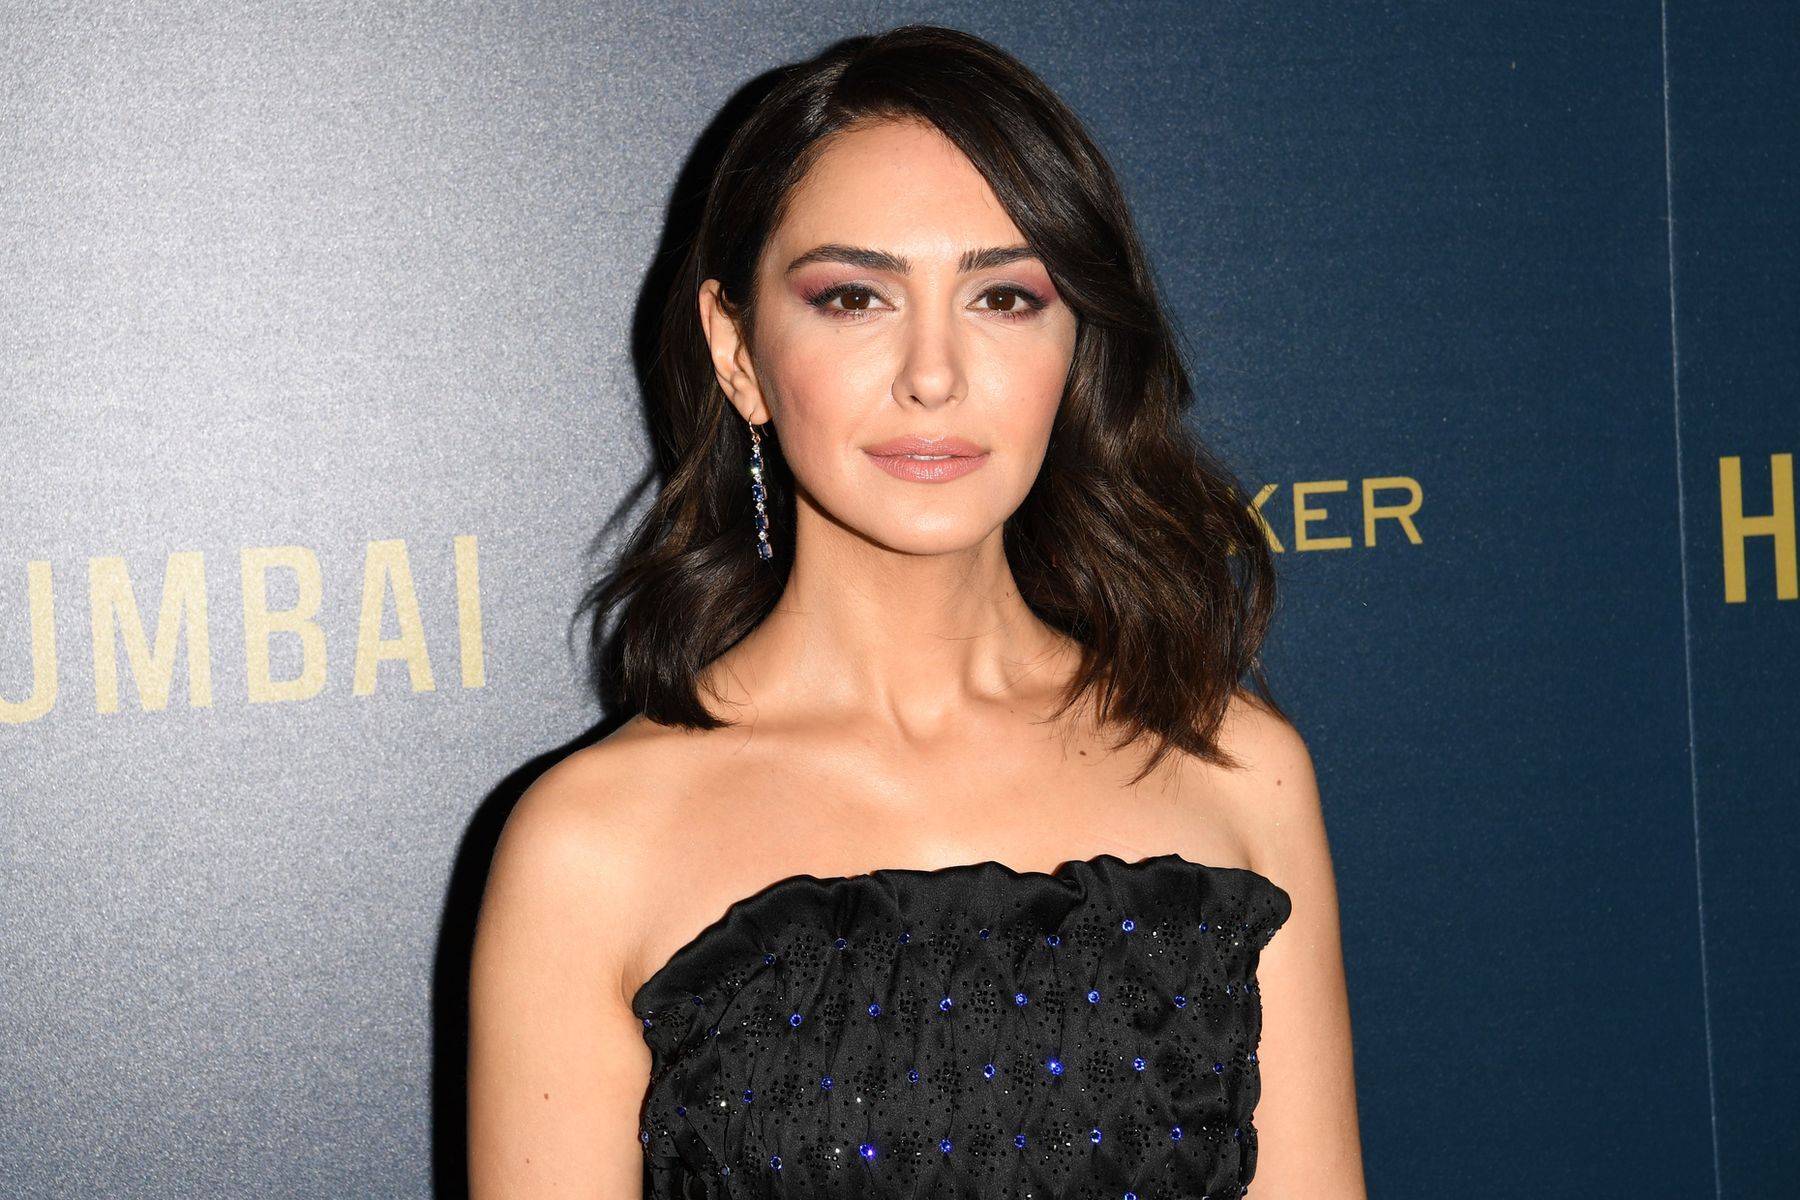 <p>According to reports, Cruise’s next relationship, with <em>General Hospital</em> star Nazanin Boniadi, was orchestrated by the Church of Scientology (though the church has denied such insinuations). The allegations, which included extreme descriptions of how Boniadi was prepped to meet the star, were made in HBO’s documentary about Scientology, <a href="https://nypost.com/2013/10/23/who-needs-tom-cruise-scientology-gal-speaks-out/" class="atom_link atom_valid"><em>Going Clear</em></a>. The pair dated from November 2004 to January 2005. </p>